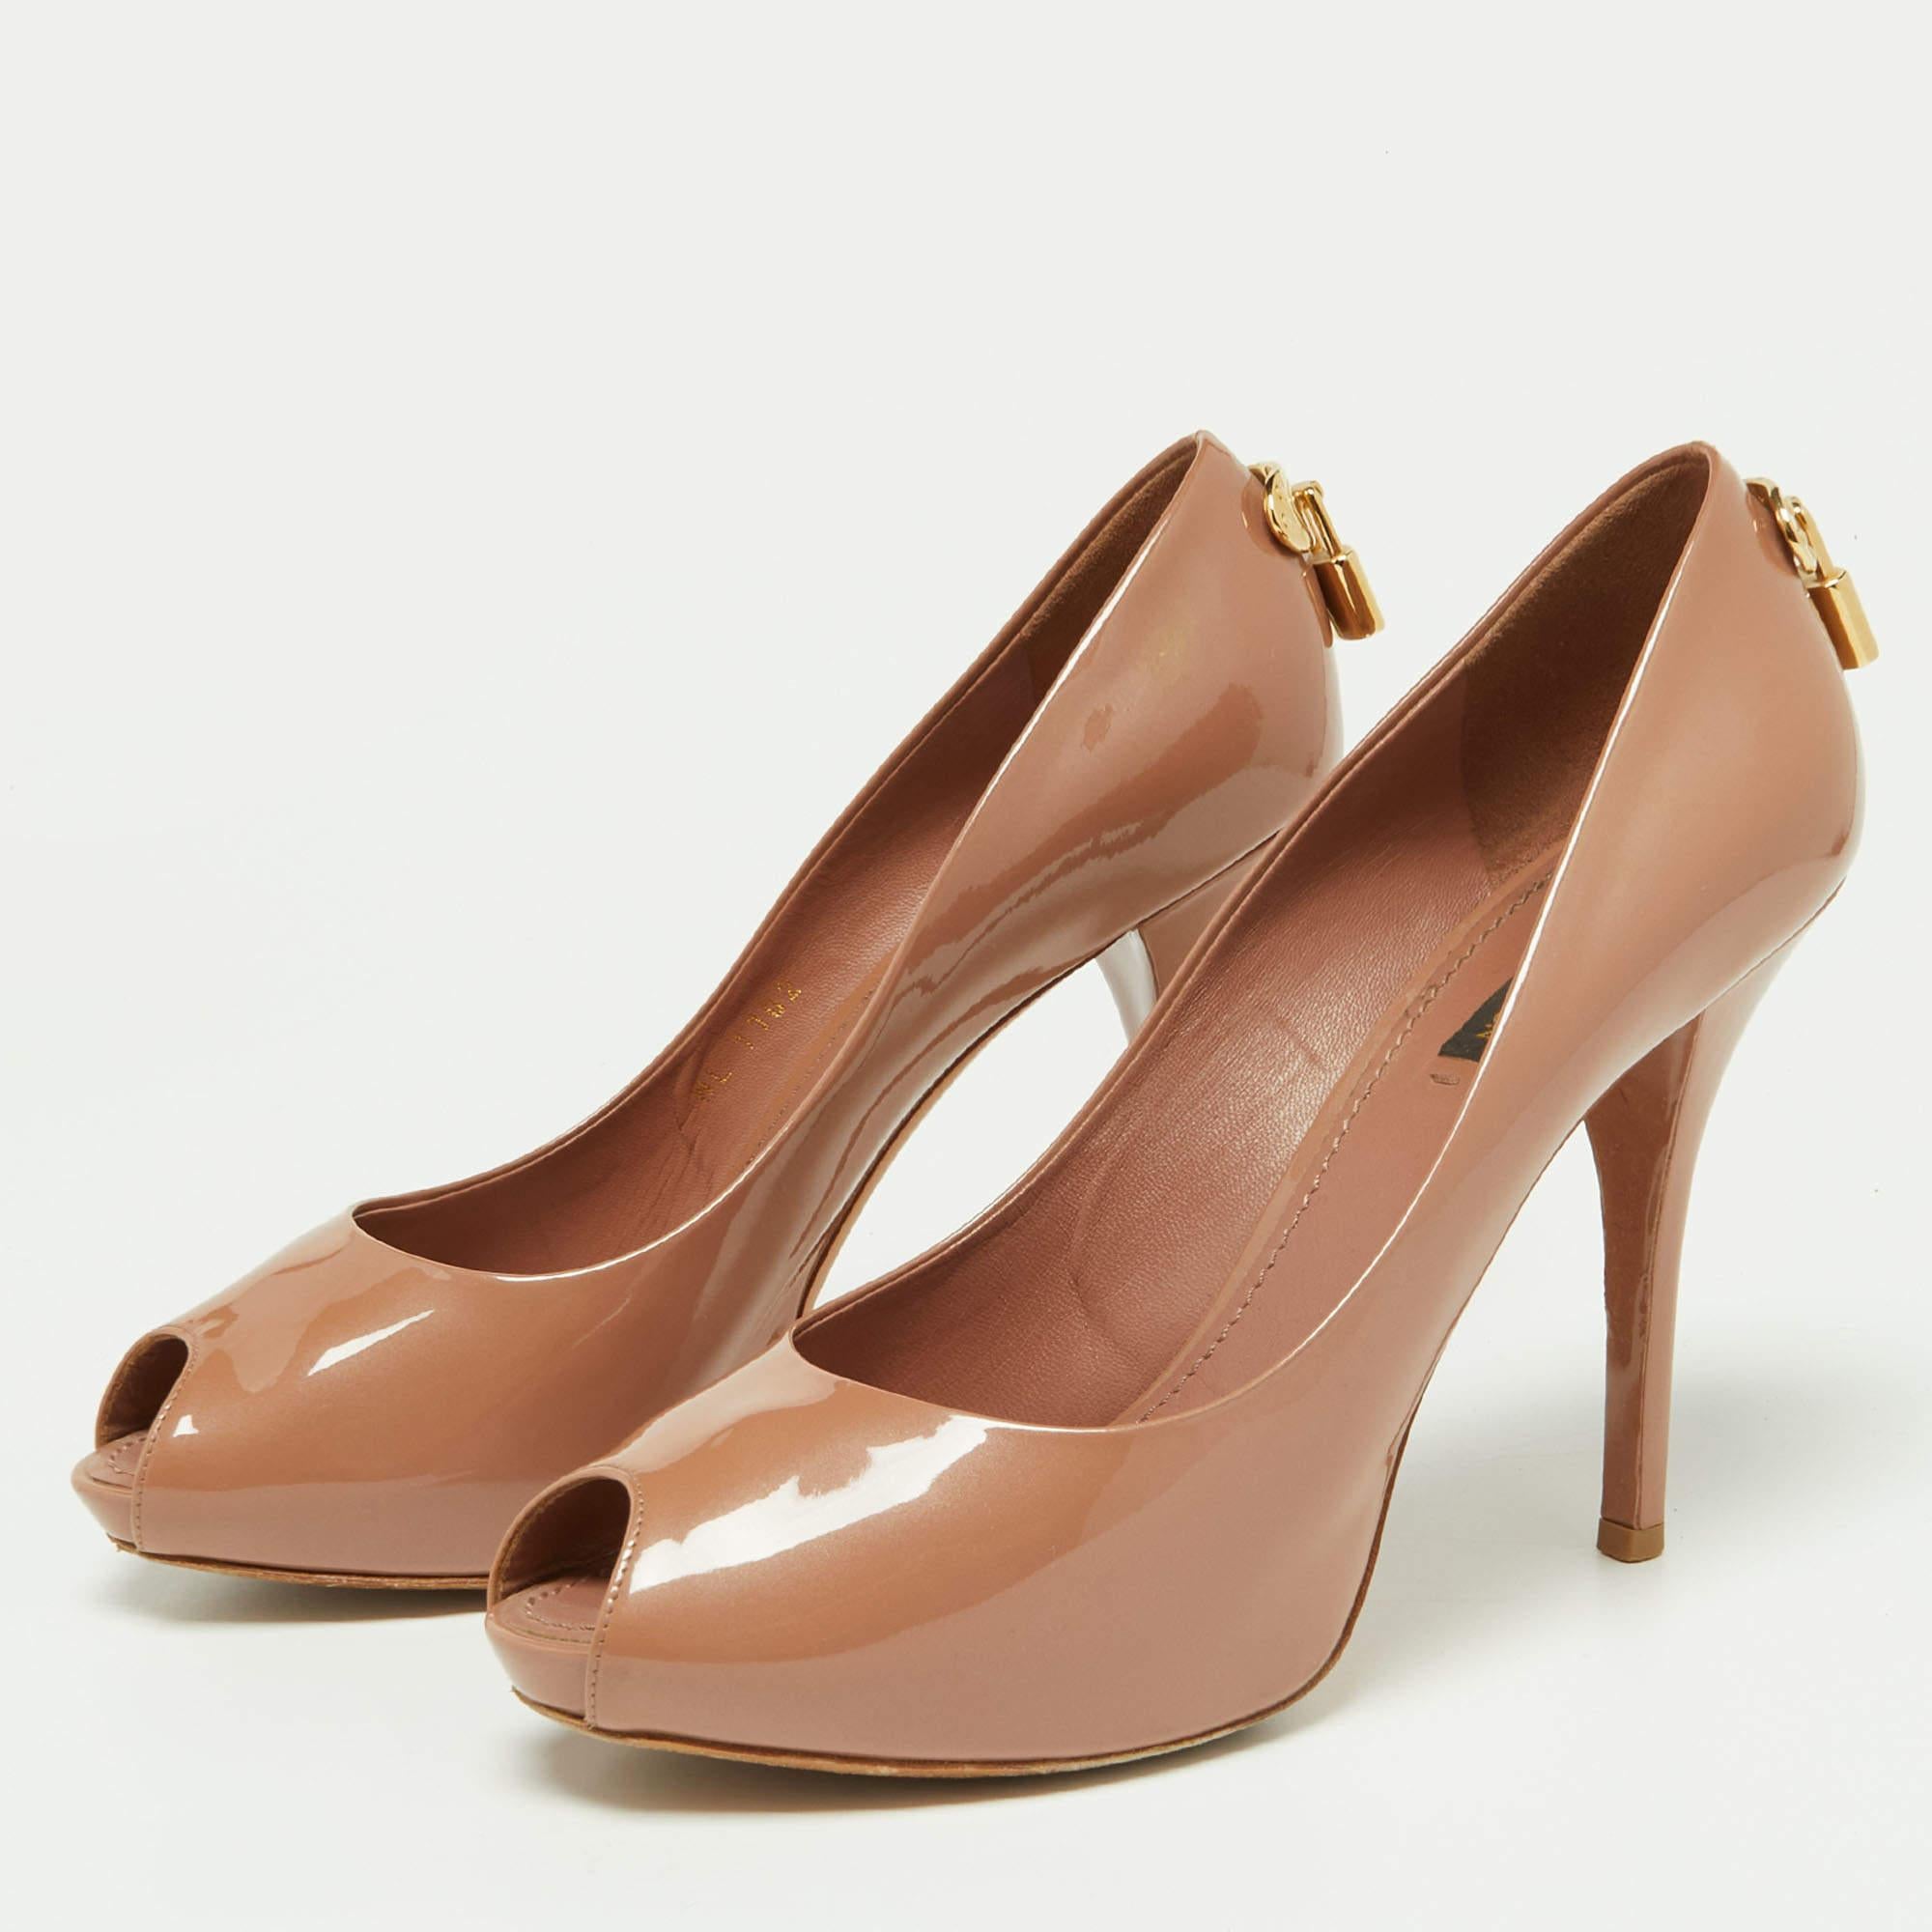 Get an elegant look with these pumps by Louis Vuitton. Beautifully designed, they flaunt peep toes and comfortable heels. Strike the right pose by assembling the pair with a dress or jumpsuit.

